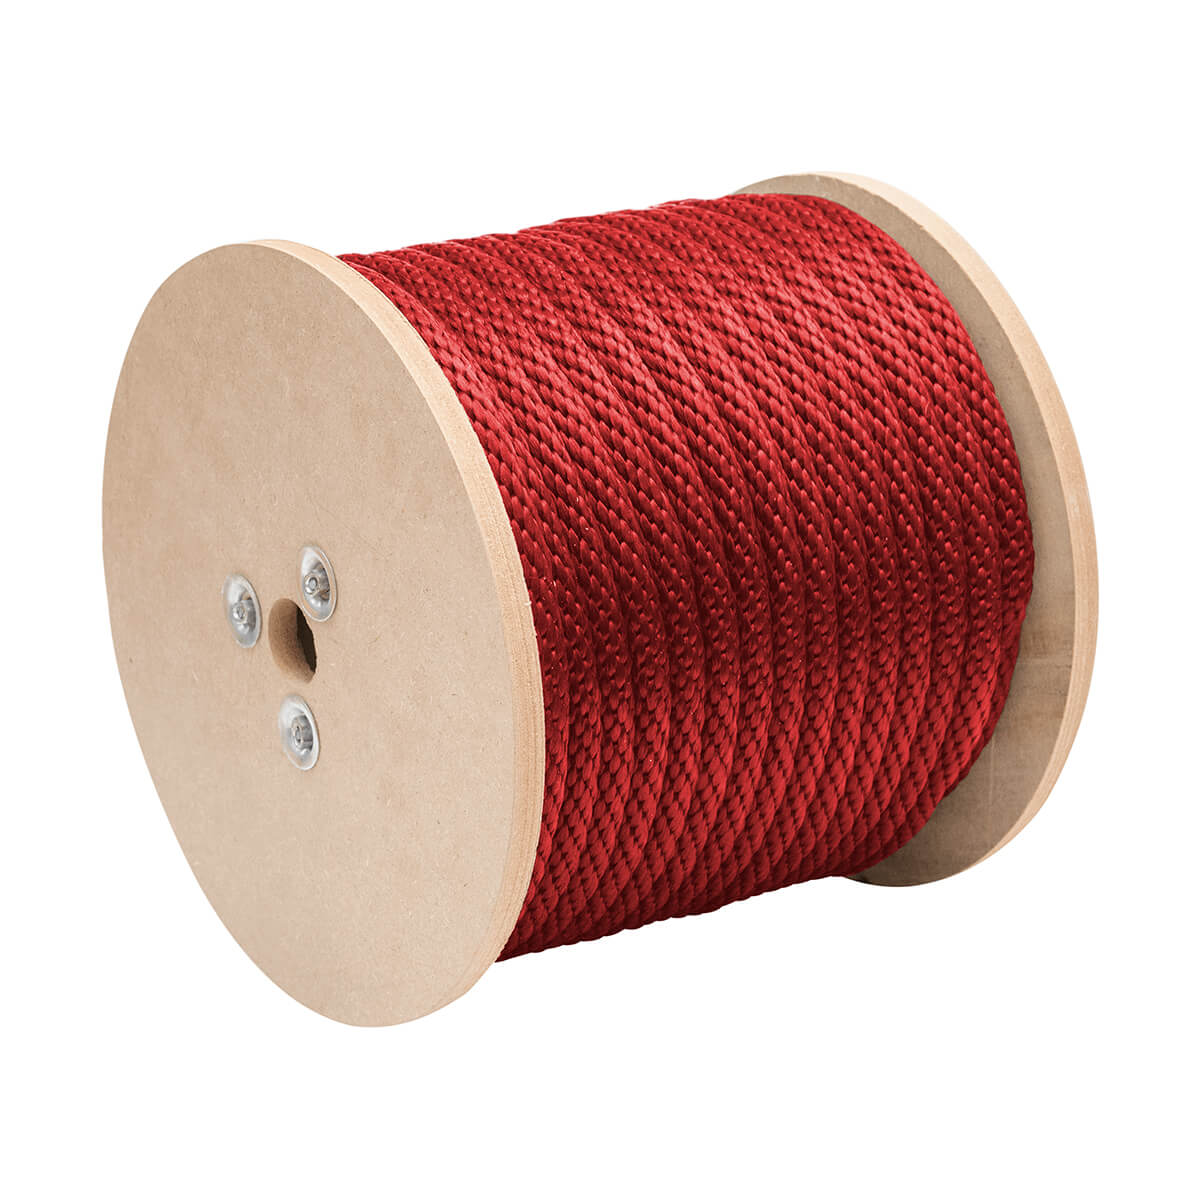 Smooth Polypropylene Braid Rope - Red - 5/8-in - Price / ft